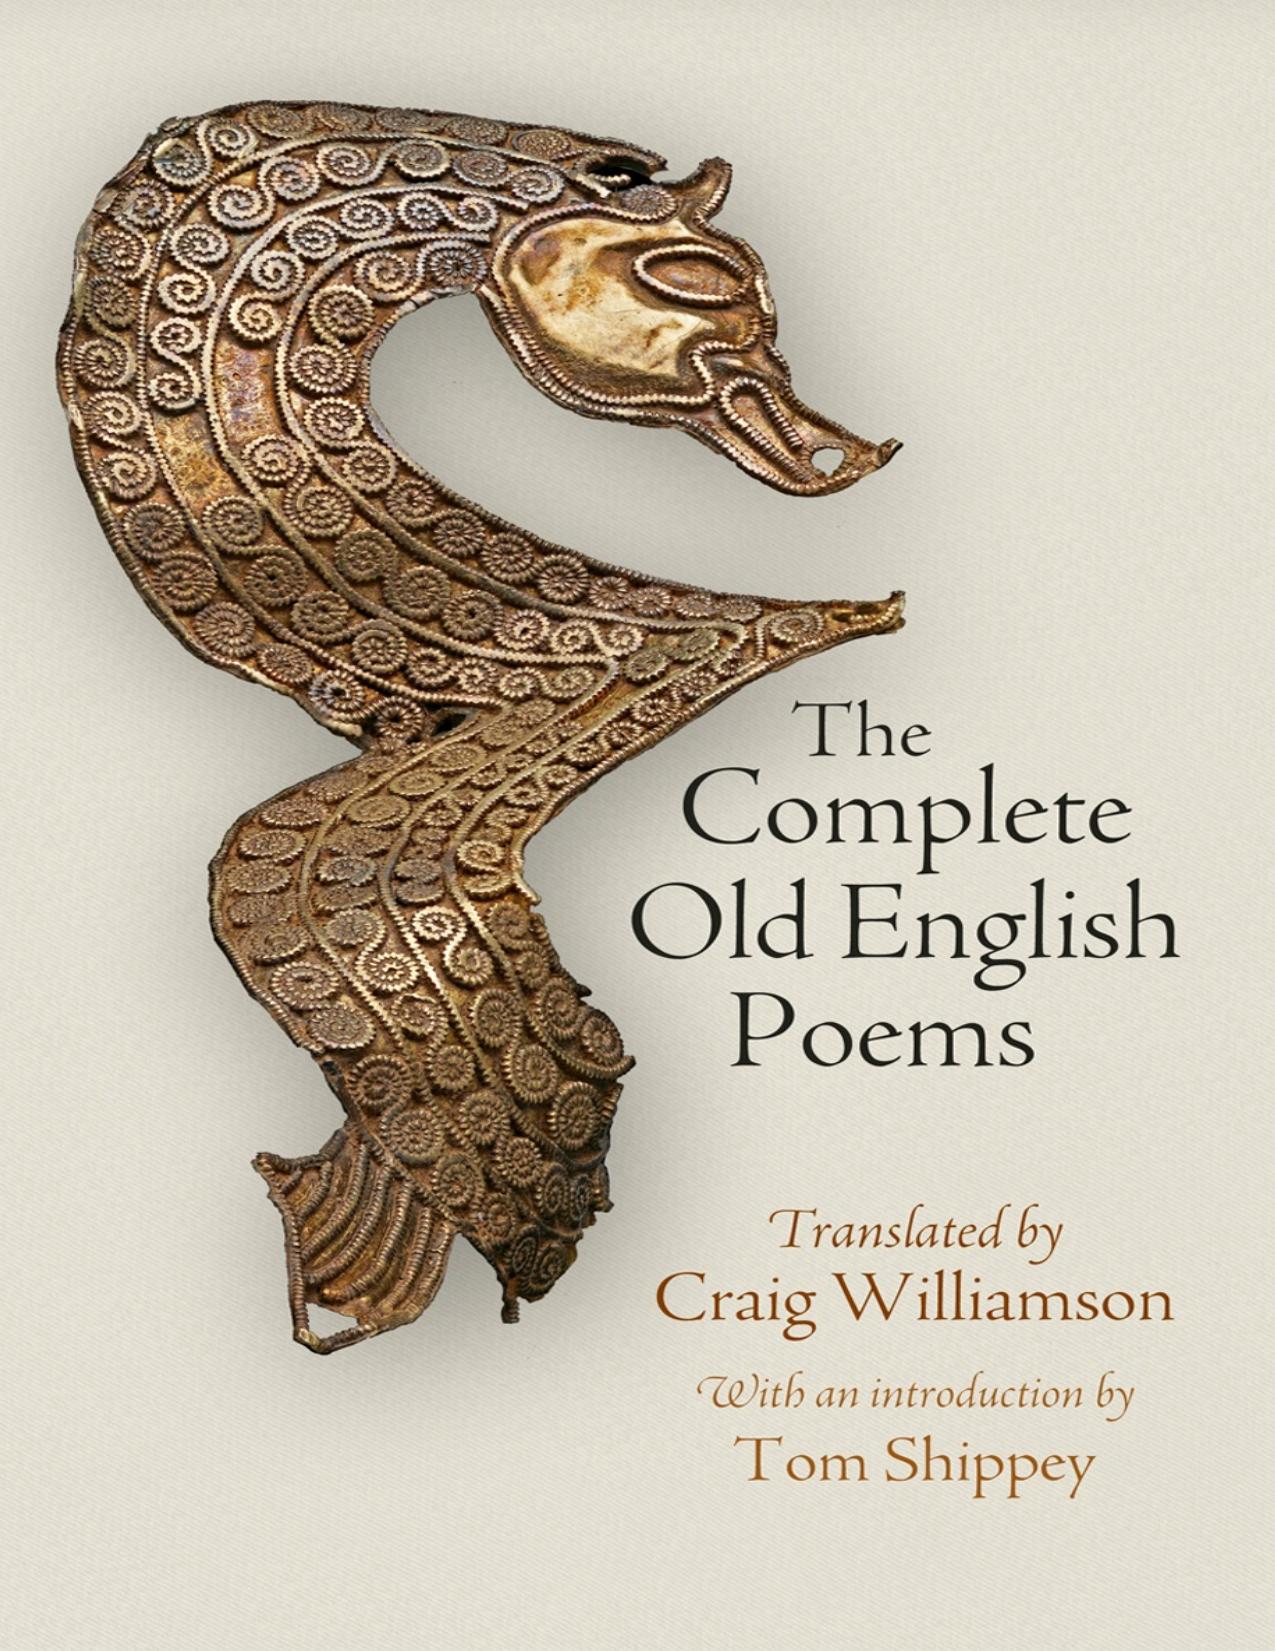 The Complete Old English Poems - PDFDrive.com